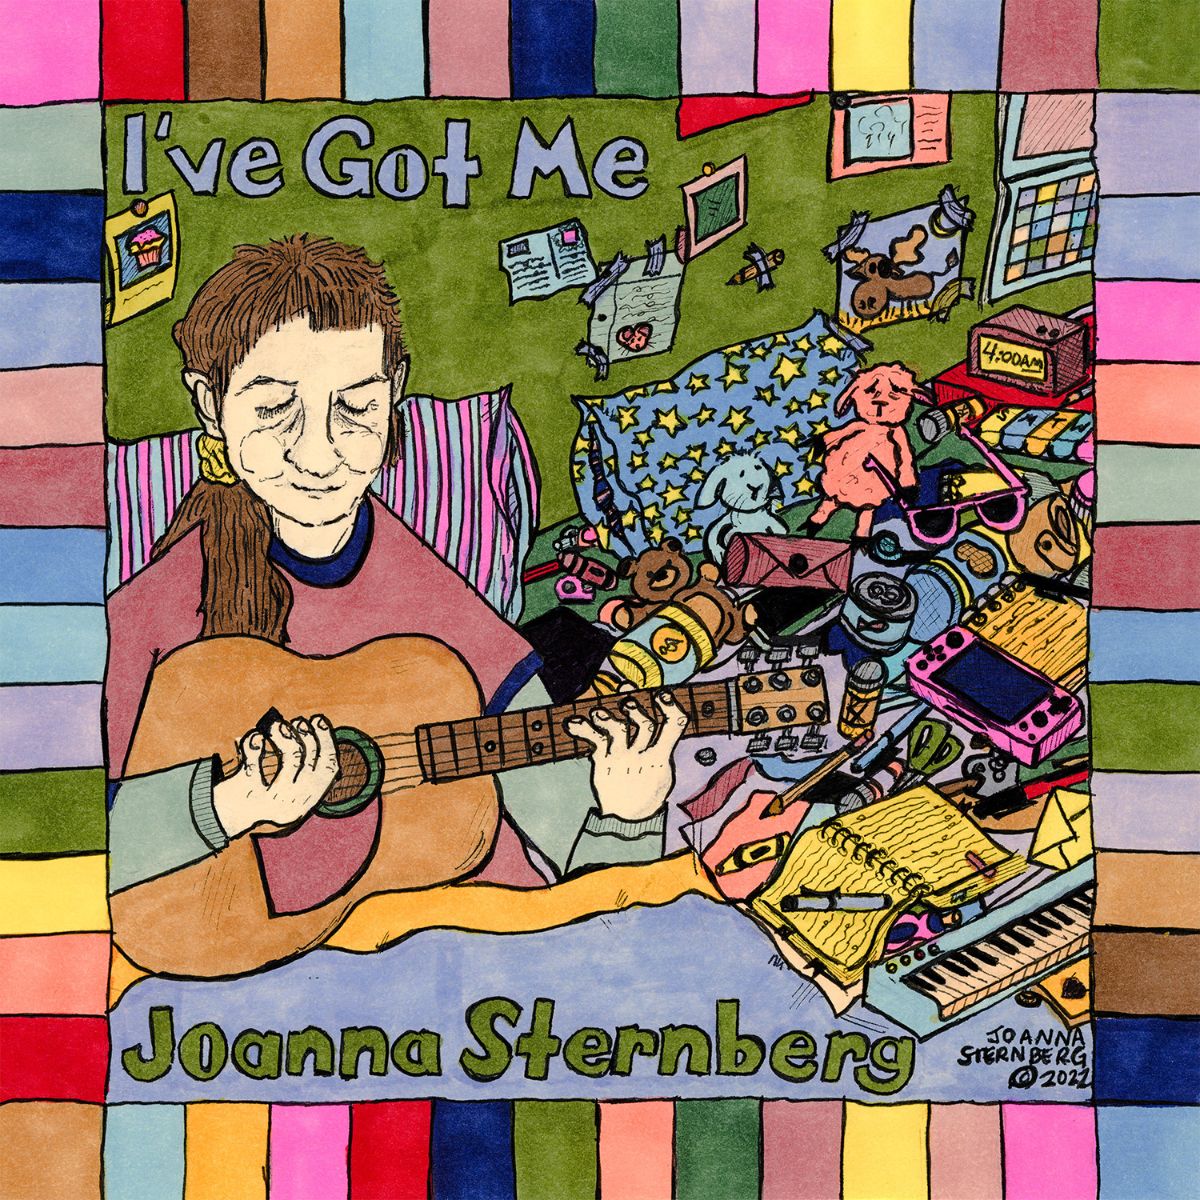 Read more about the article Joanna Sternberg announces new album, I’ve Got Me & releases the title track/video